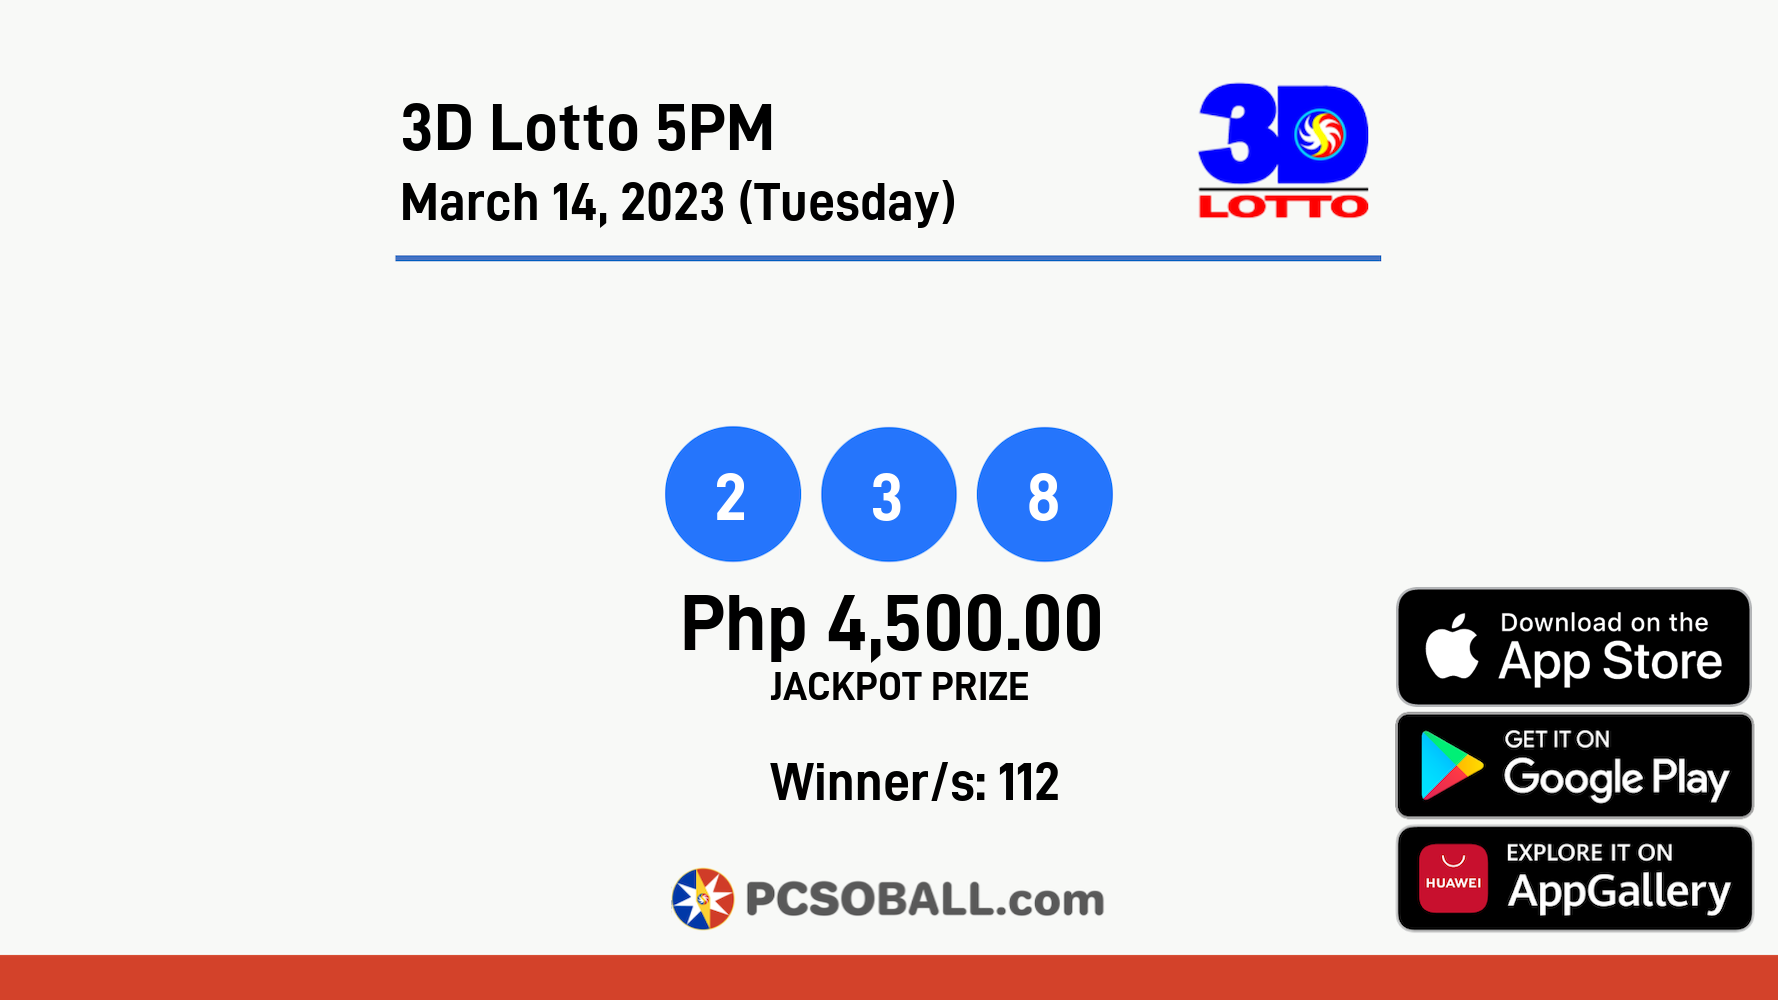 3D Lotto 5PM March 14, 2023 (Tuesday) Result